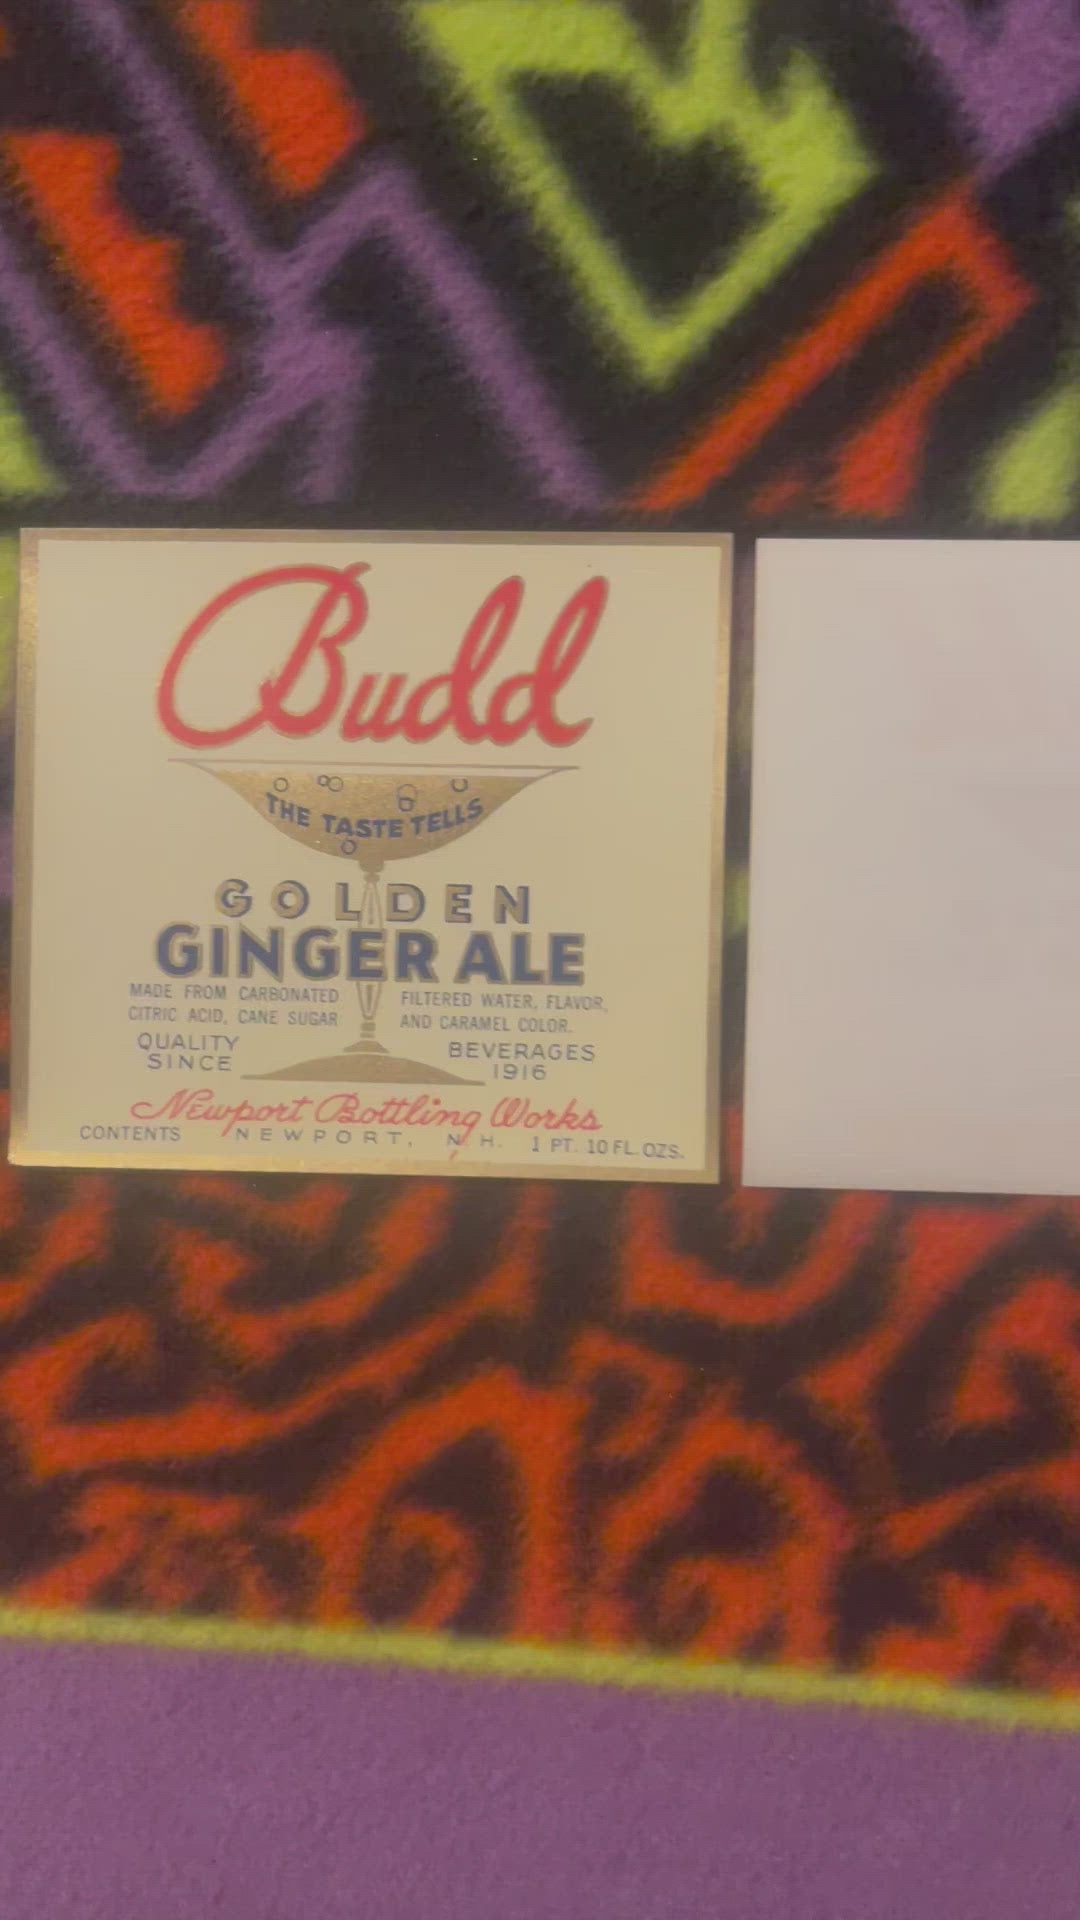 Antique Vintage Budd Ginger Ale Label, Newport, NH 1920s, Highly Collectible! Vintage Advertisements Home page Vintage and Antique Gifts